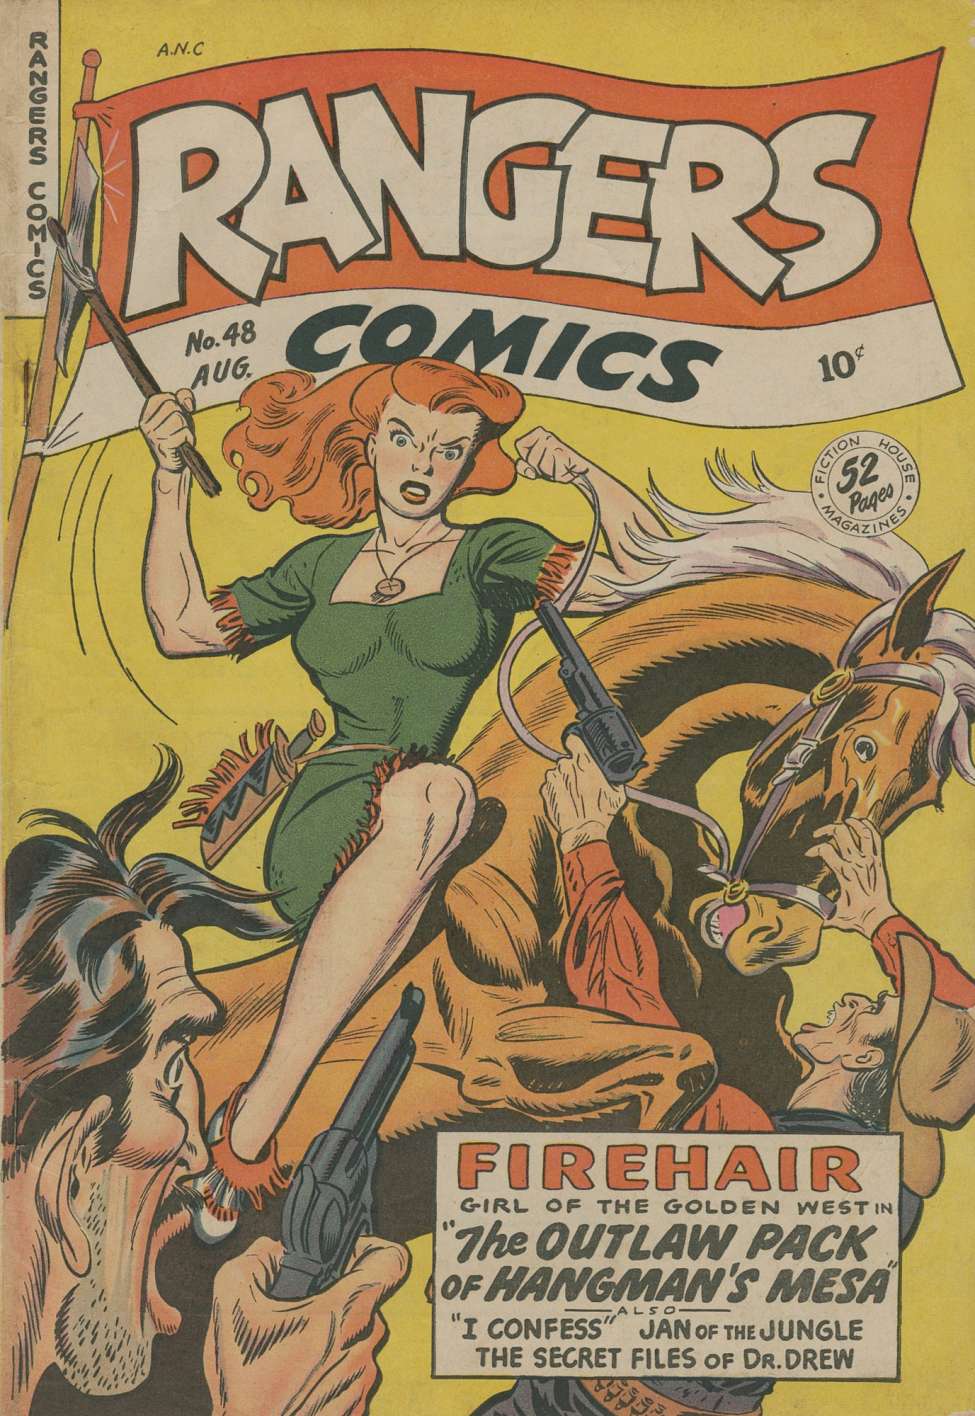 Comic Book Cover For Rangers Comics 48 - Version 2